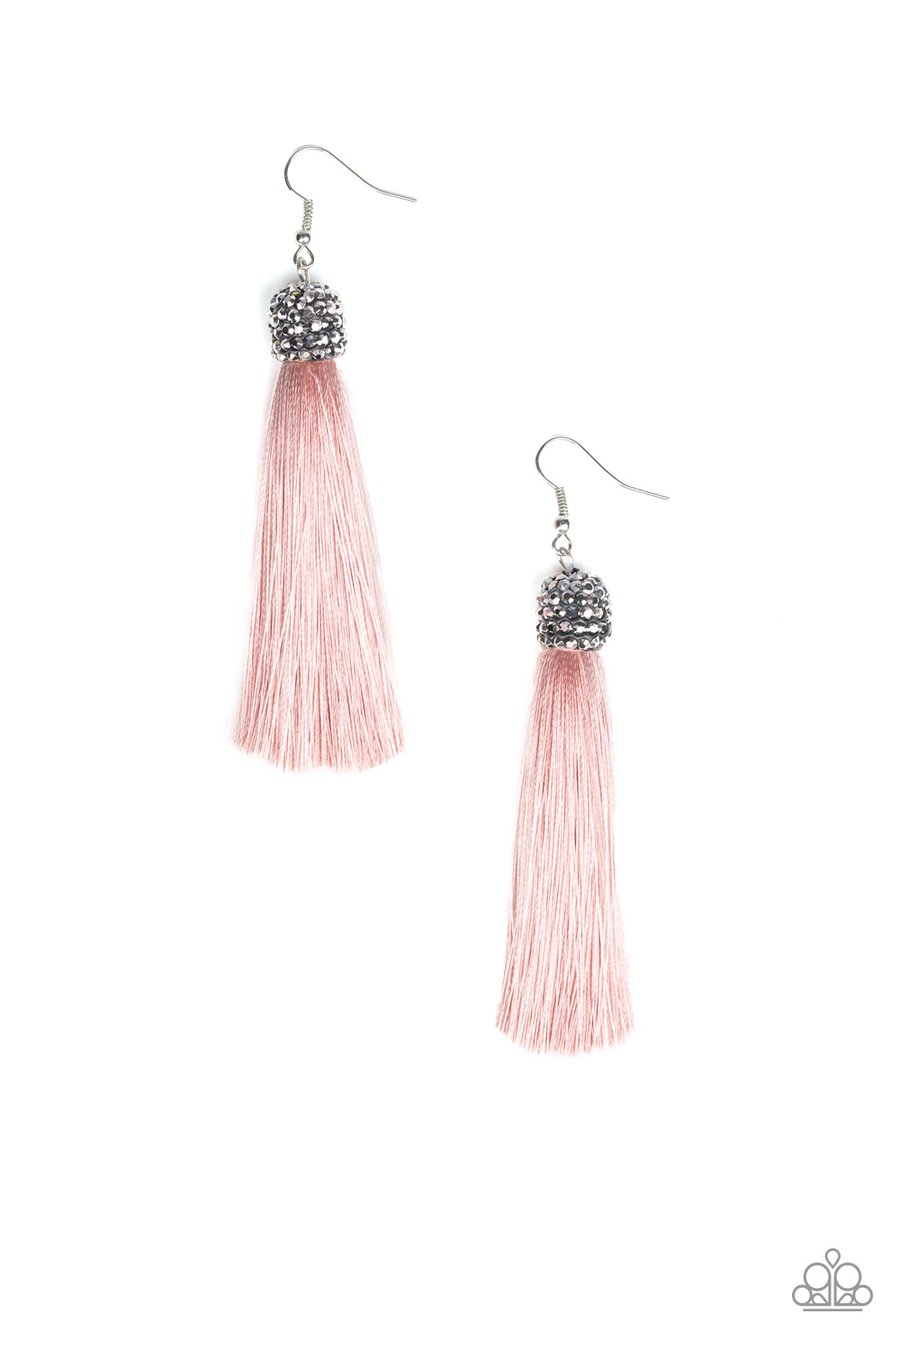 Paparazzi Accessories Make Room for Plume - Pink Earrings - Lady T Accessories